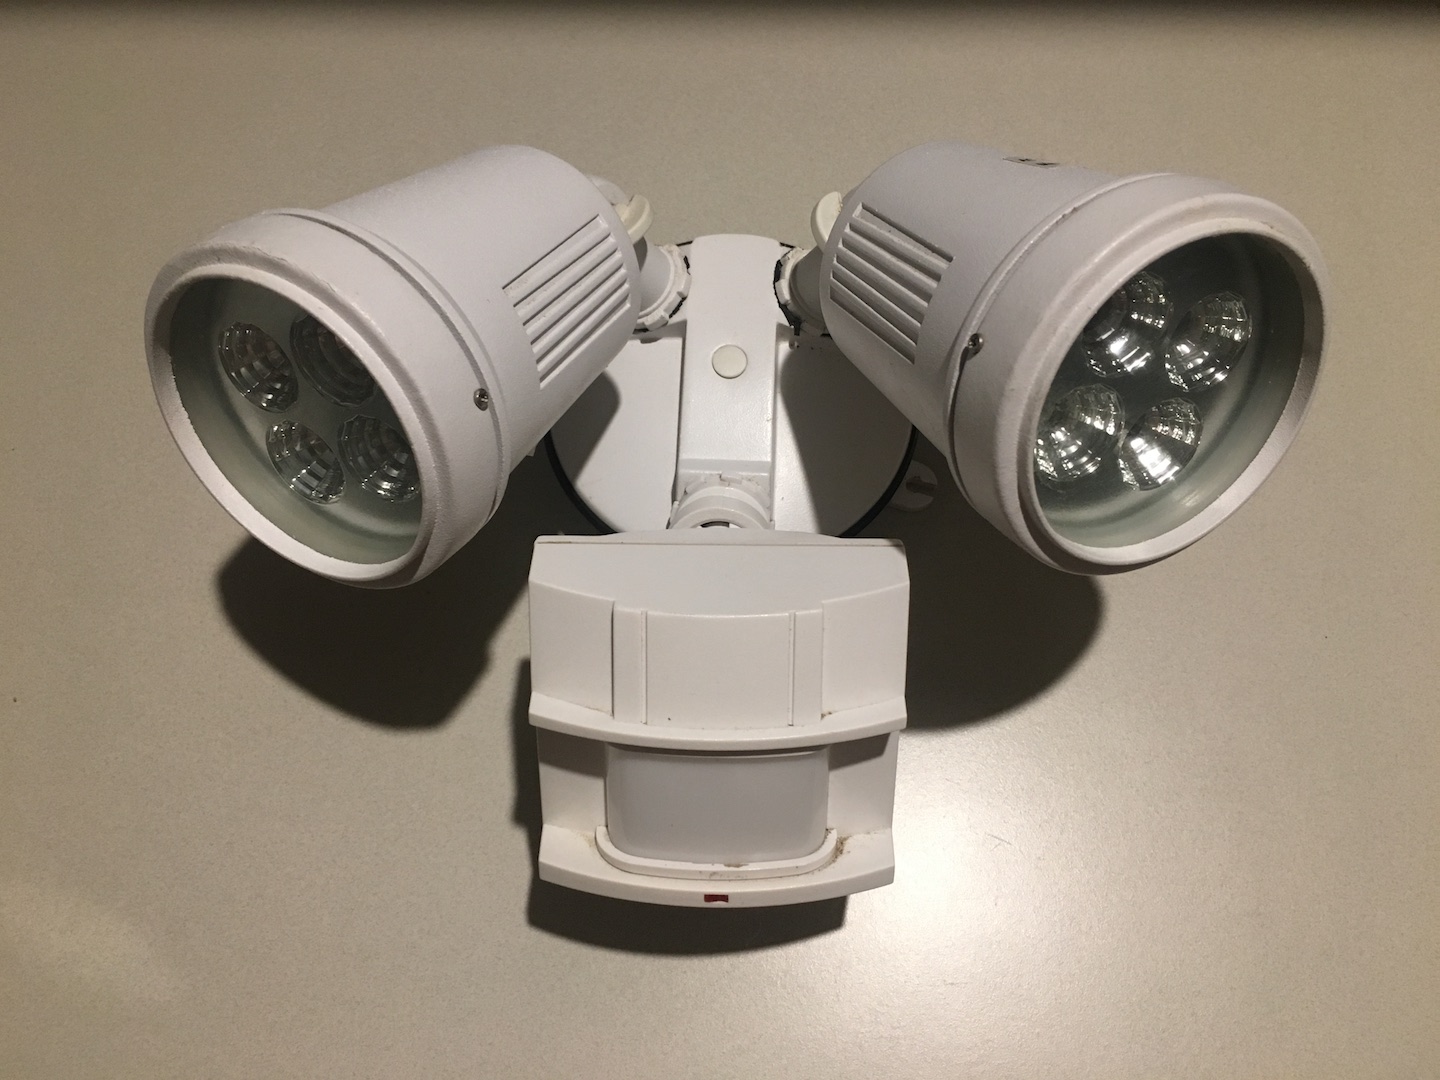 Motion sensor activated security light